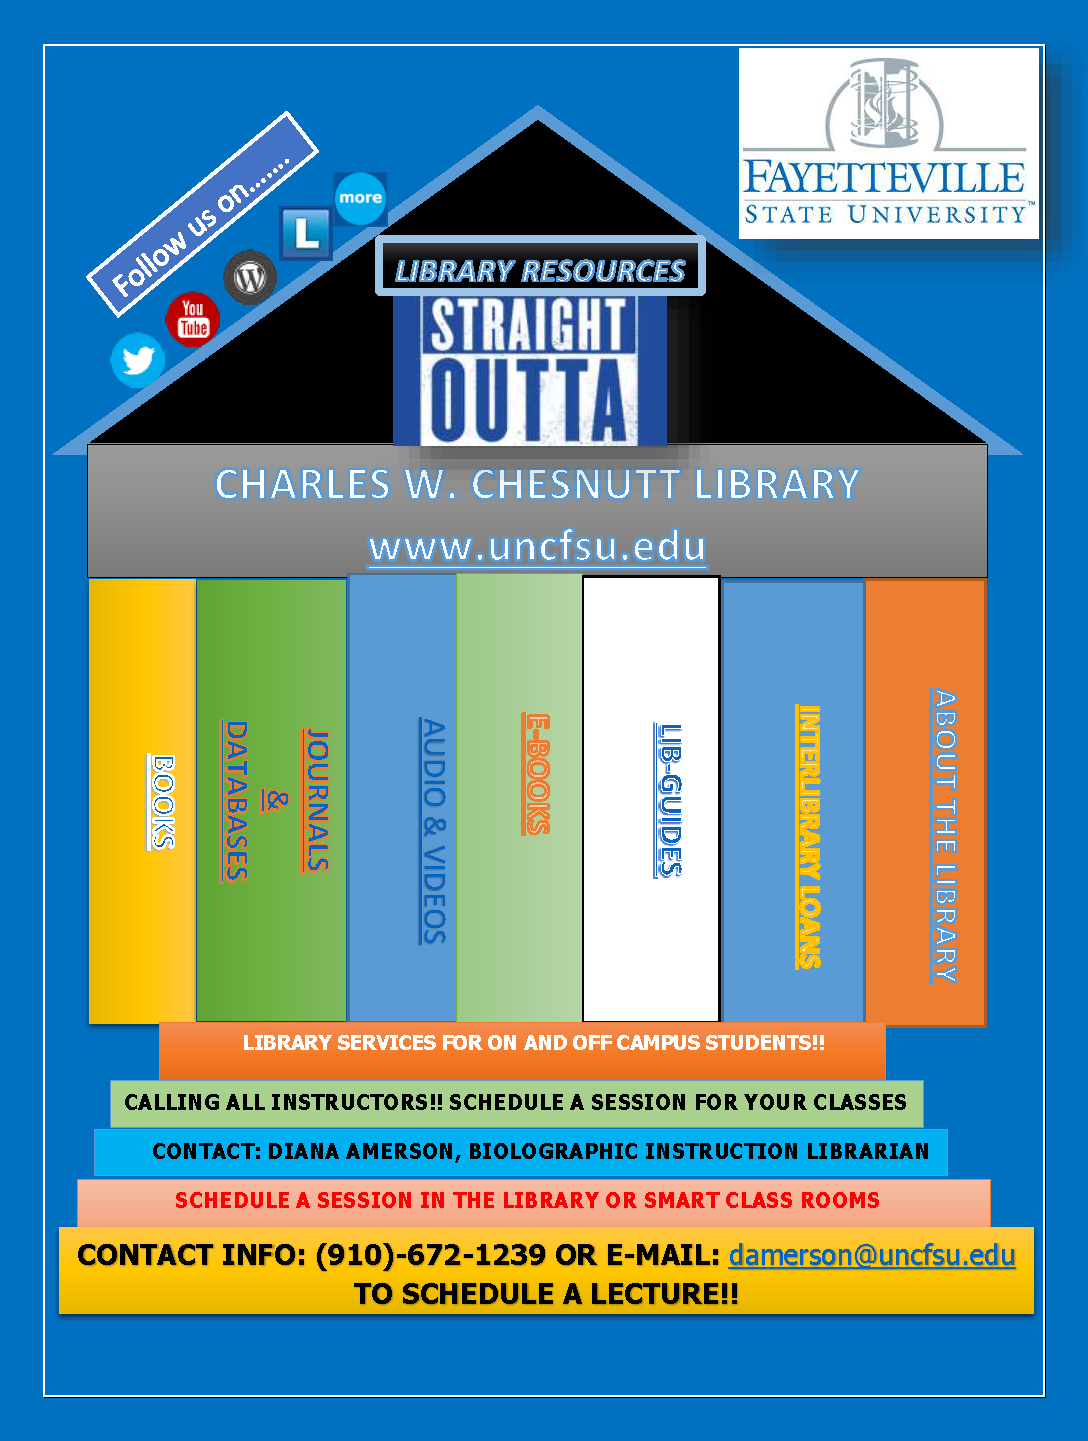 Resources ‘Straight Outta’ #ChesnuttLibrary for Students, Faculty, and Staff (11.3.2015) #BroncoPride #FayState #LibChat